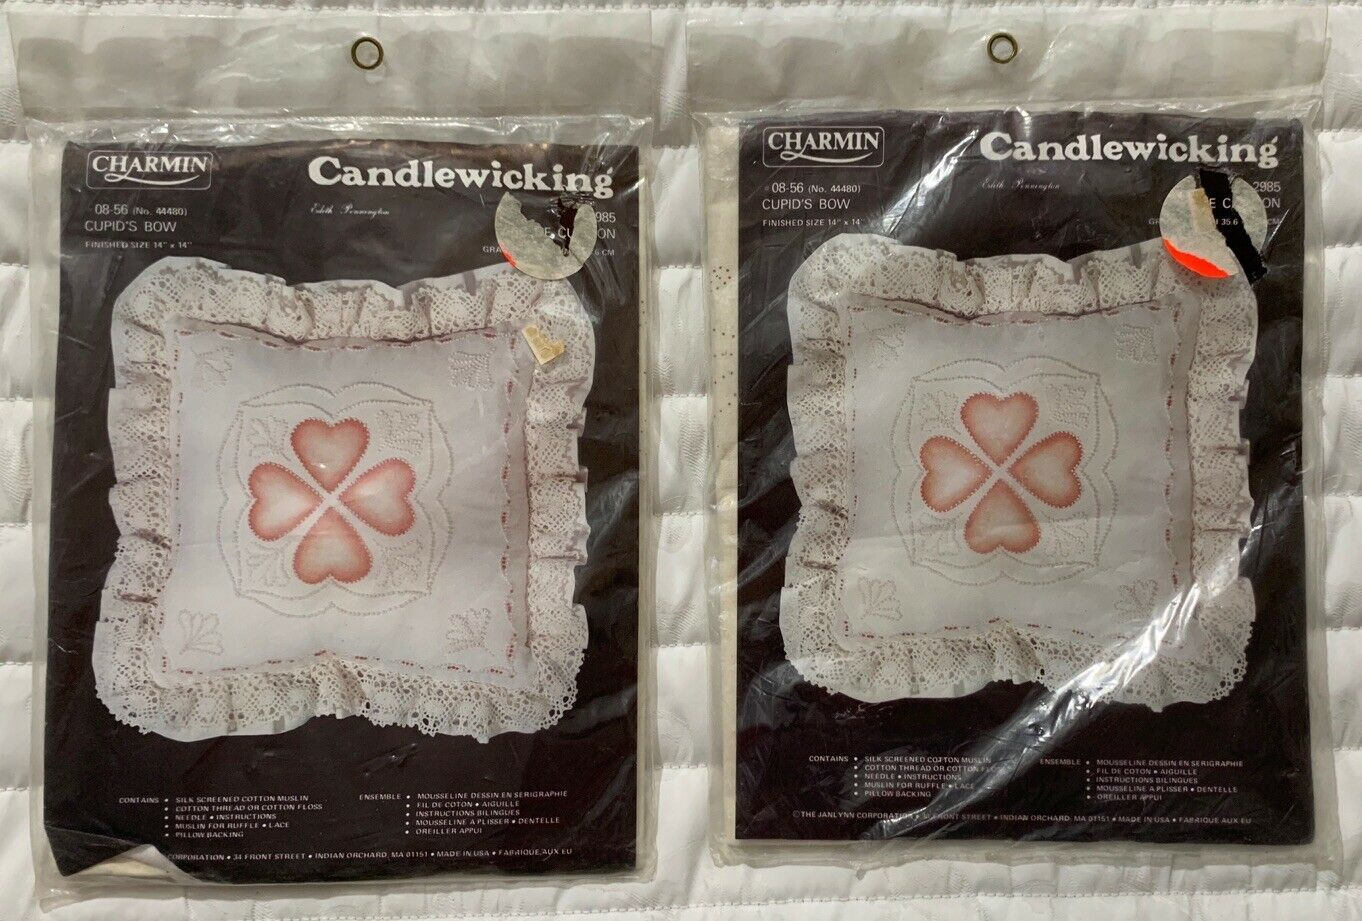 1 VTG Candlewicking Kit "Cupid's Bow" Pillow Kit 14" x 14" by Charmin + Extra - $27.58